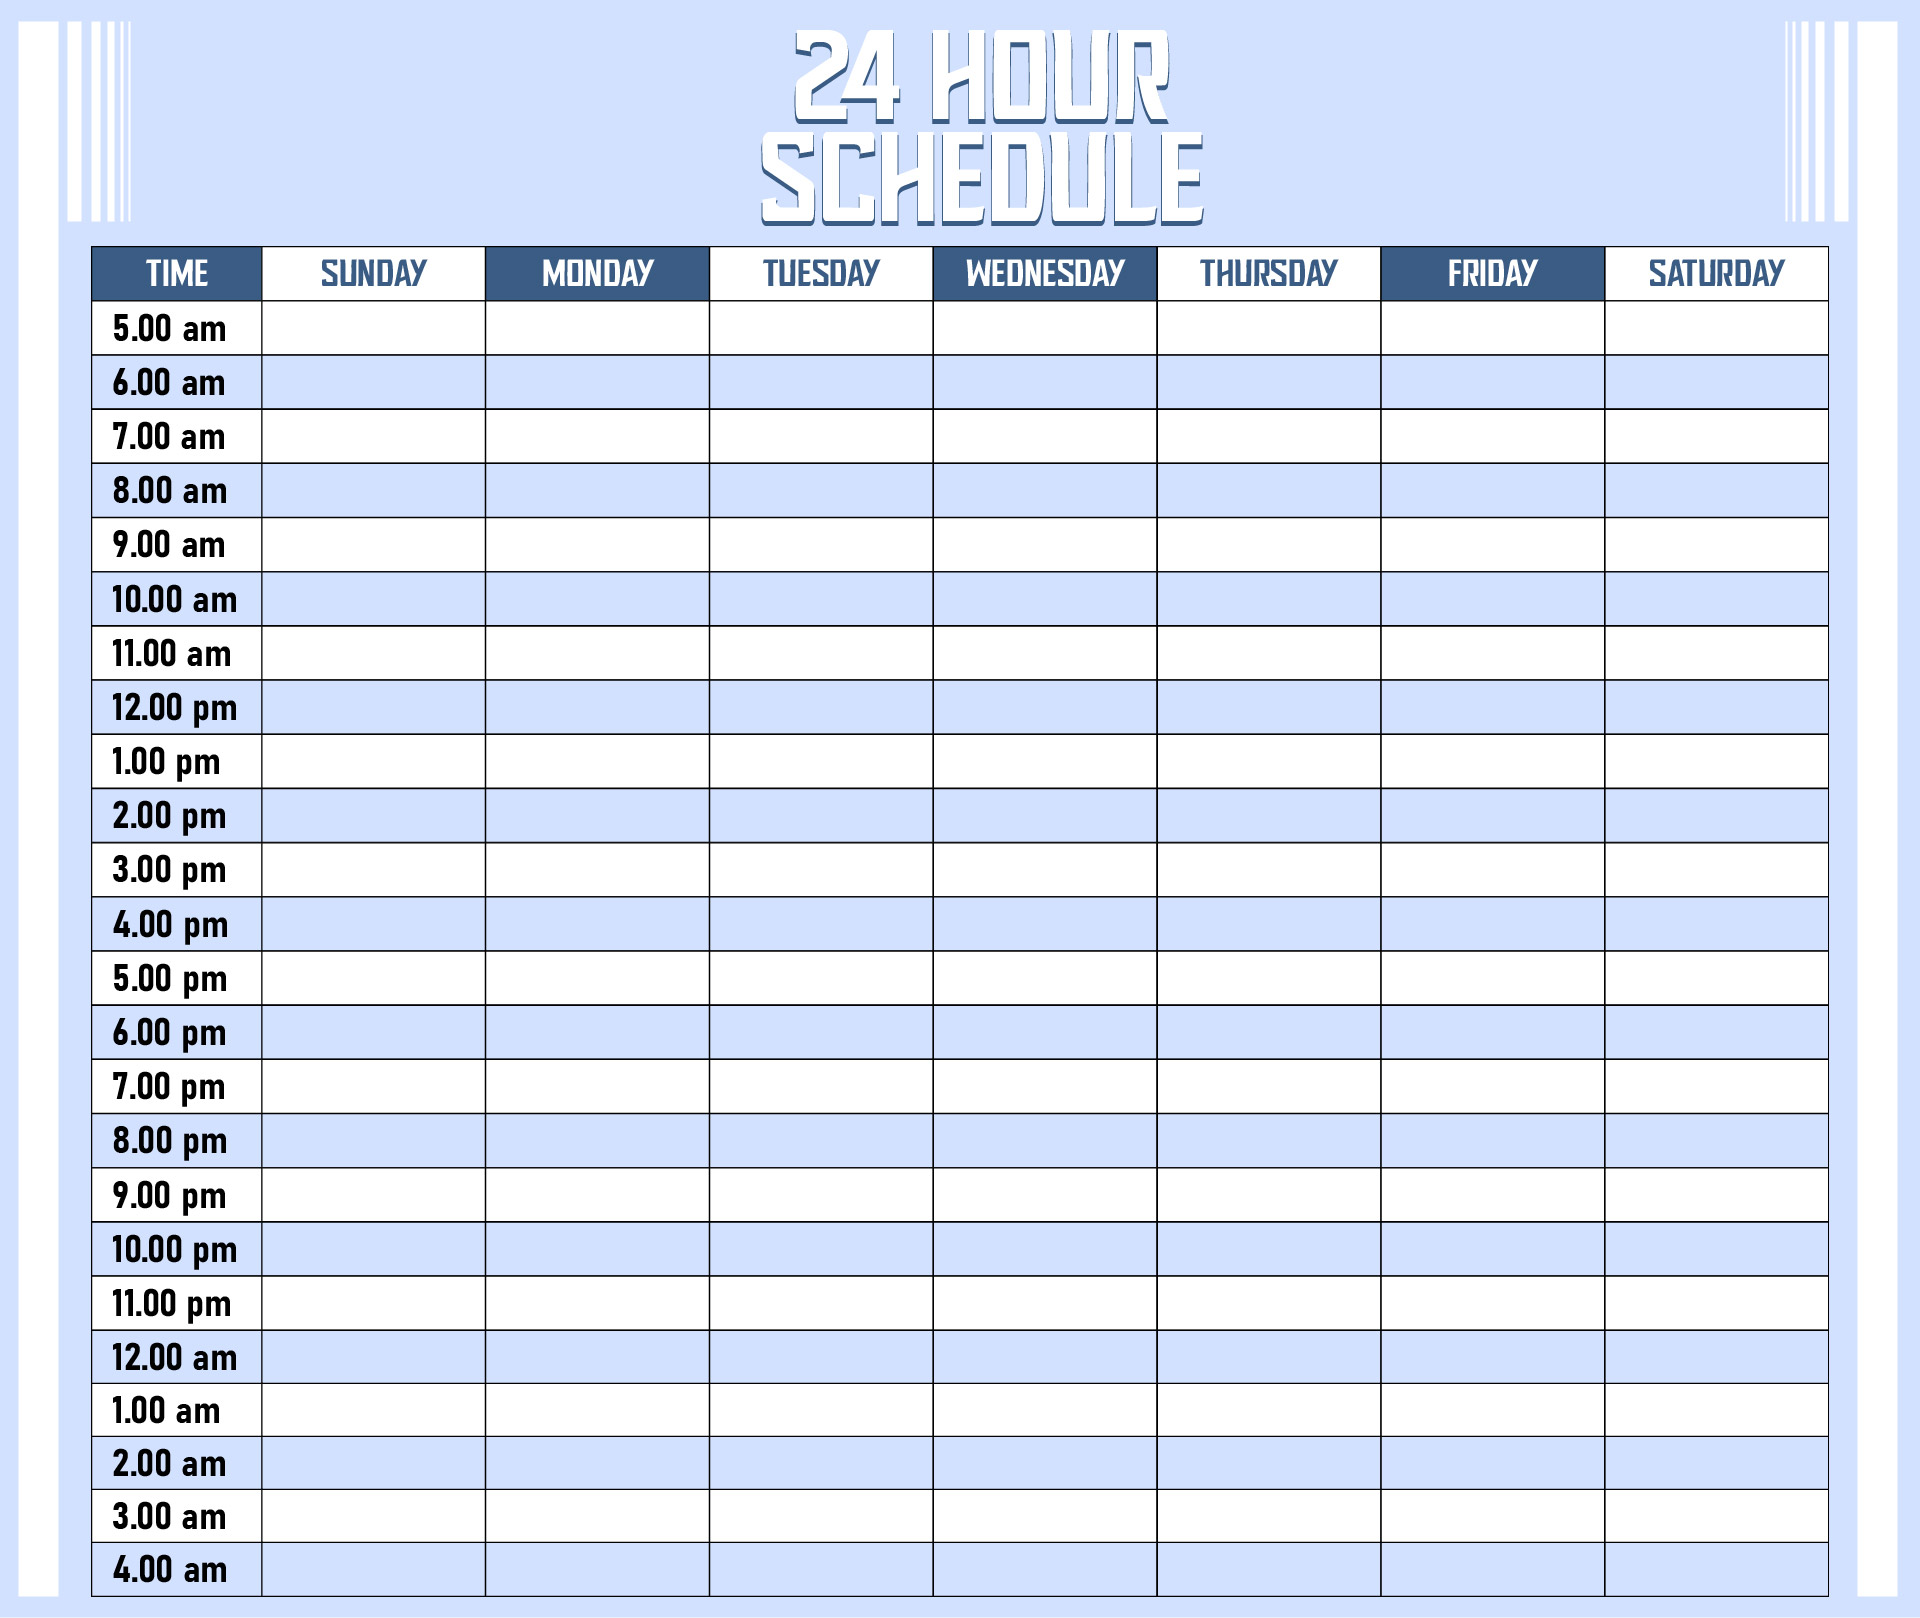 24-hour-schedule-template-excel-projects-to-try-daily-schedule